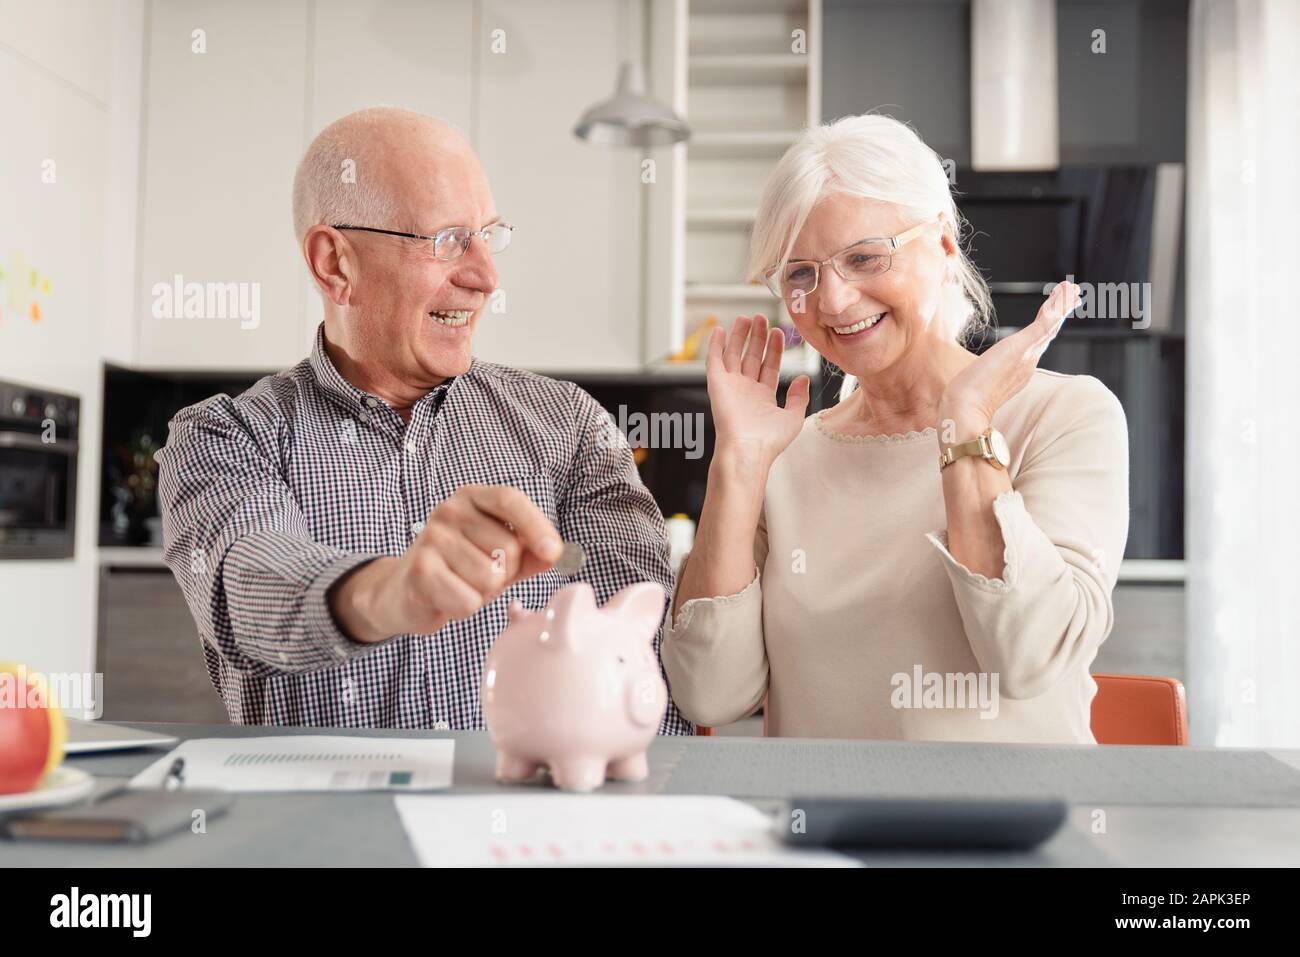 Funny photo of mature couple putting coin into piggy bank at home. Savings, pension plan concept Stock Photo